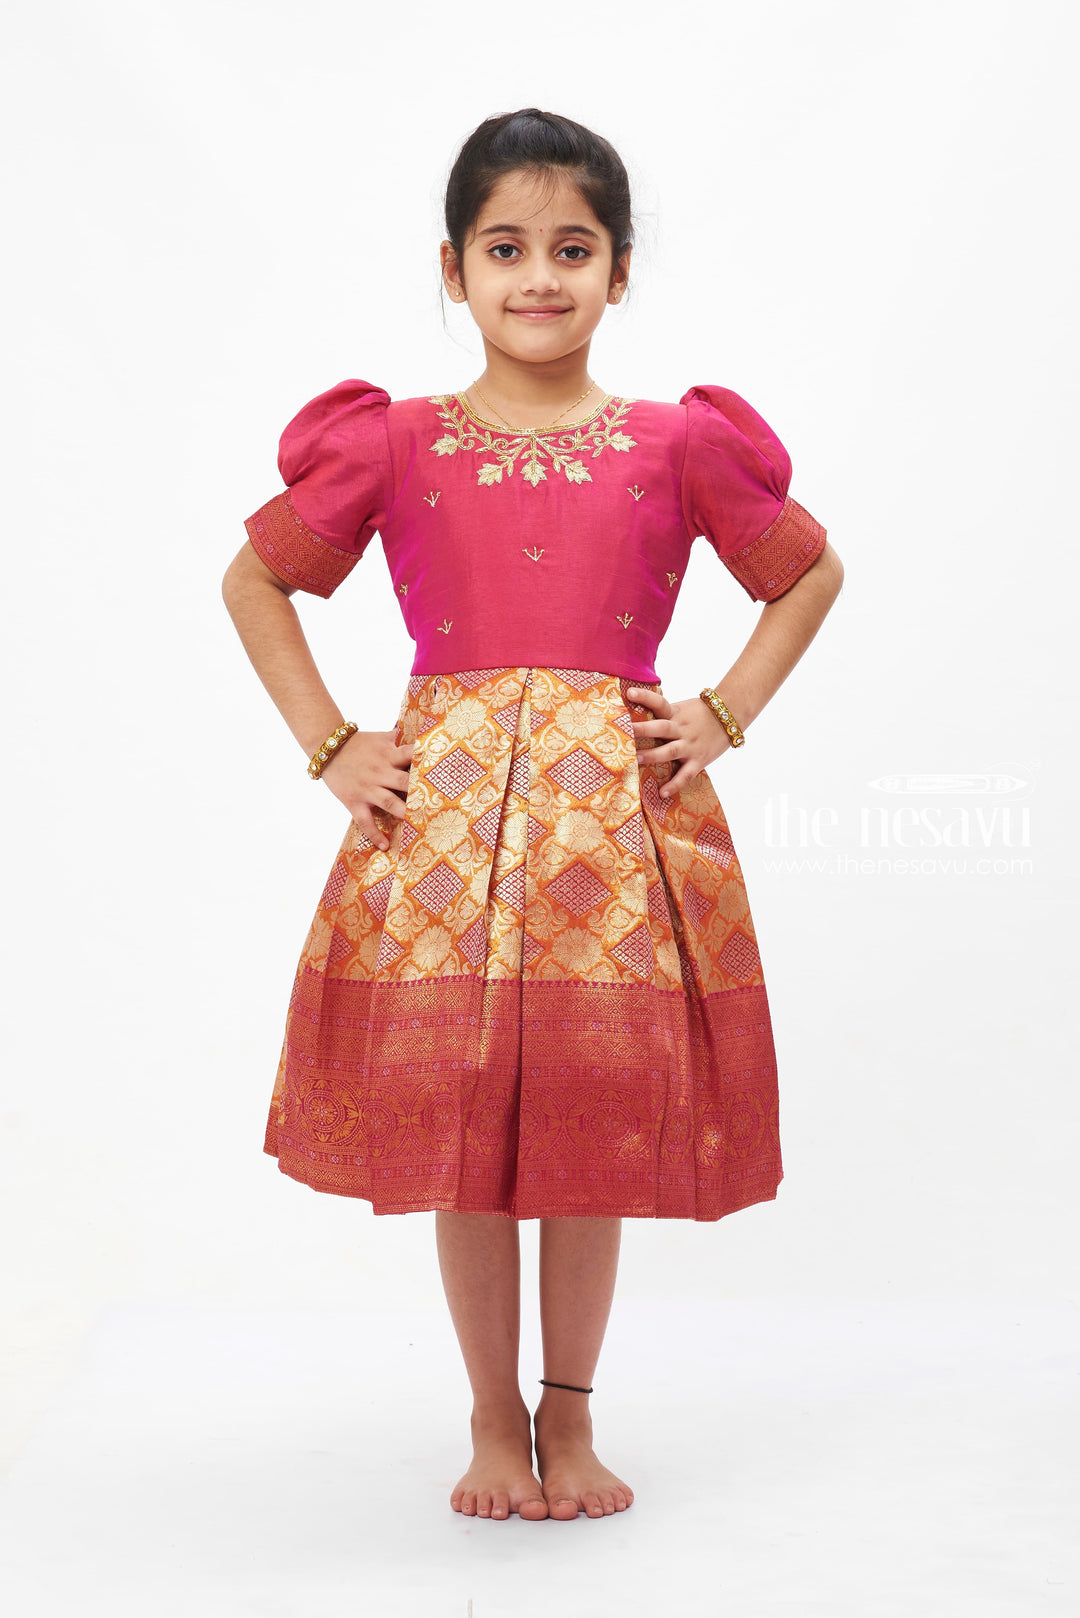 The Nesavu Silk Party Frock Royal Pink Pattu Frock with Golden Embroidery for Girls Nesavu 16 (1Y) / Pink SF736A-16 Traditional Pattu Frock for Girls | Golden Embroidery Silk Frock | The Nesavu